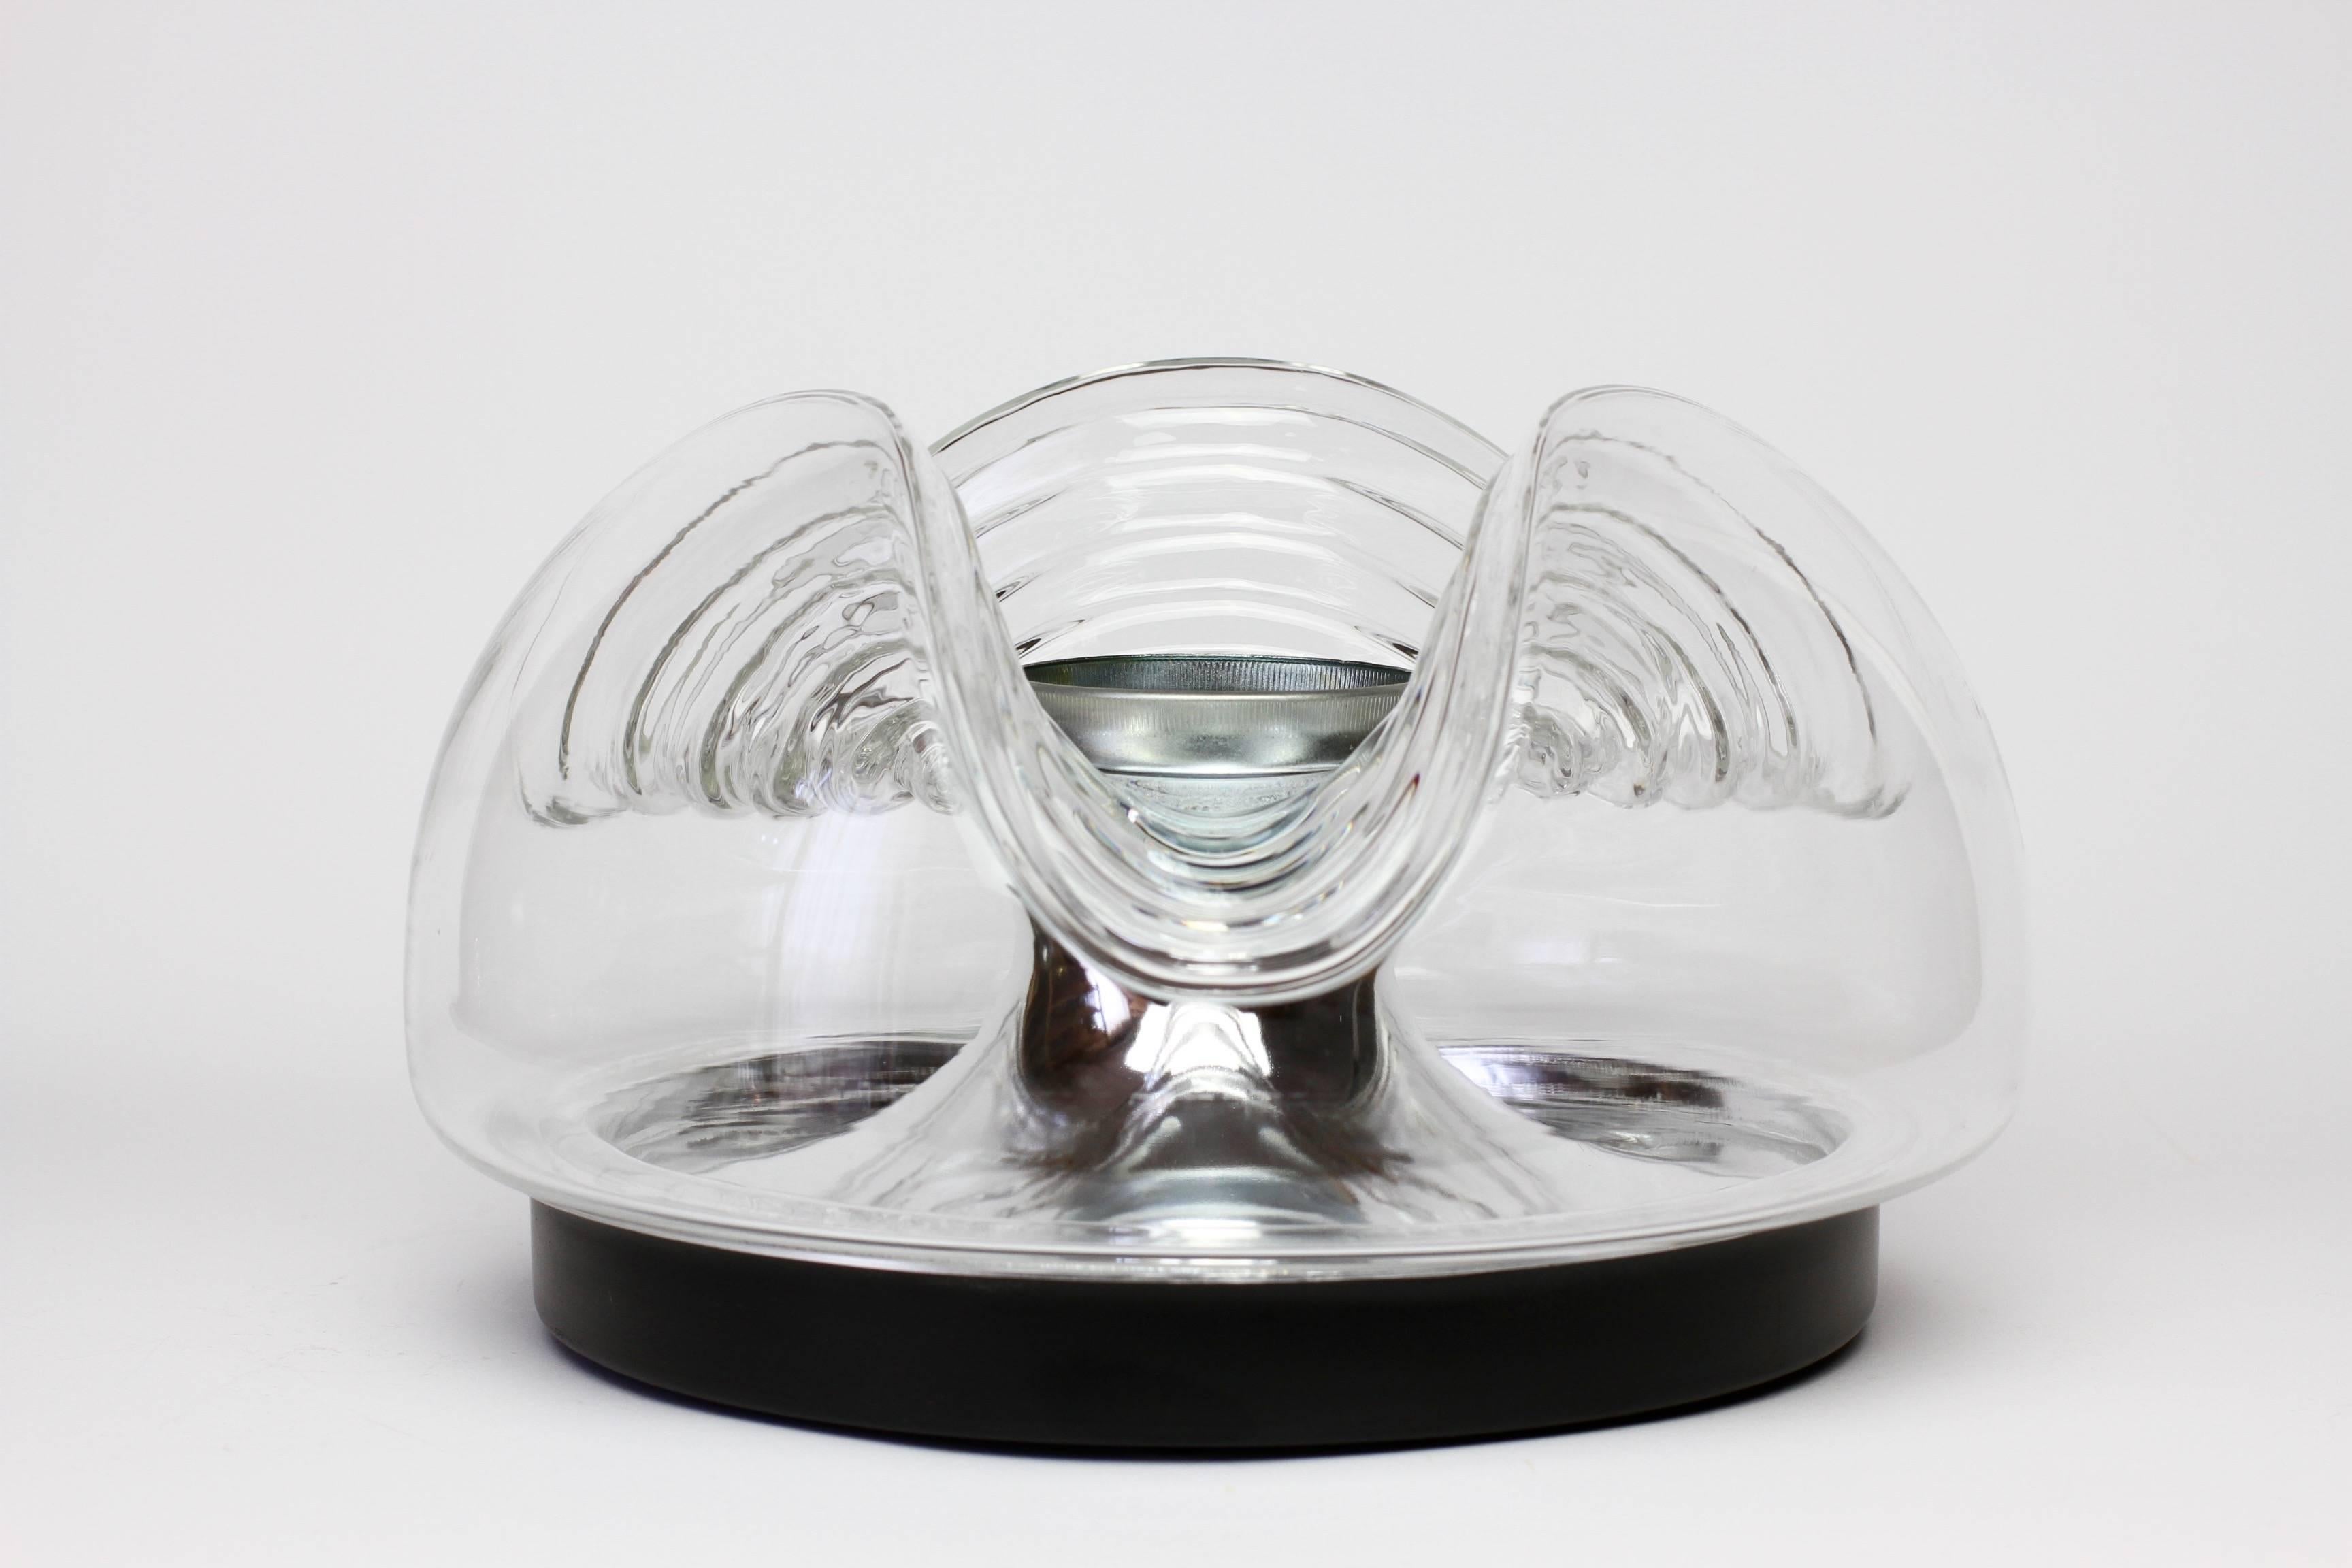 Absolutely wonderful and fun small pair of wall lights or sconces perfect for small niche or over a vanity mirror. Designed by Koch & Lowy for German lighting company Peill & Putzler, circa 1970-1975. These Futuristic pair of wall lights are a